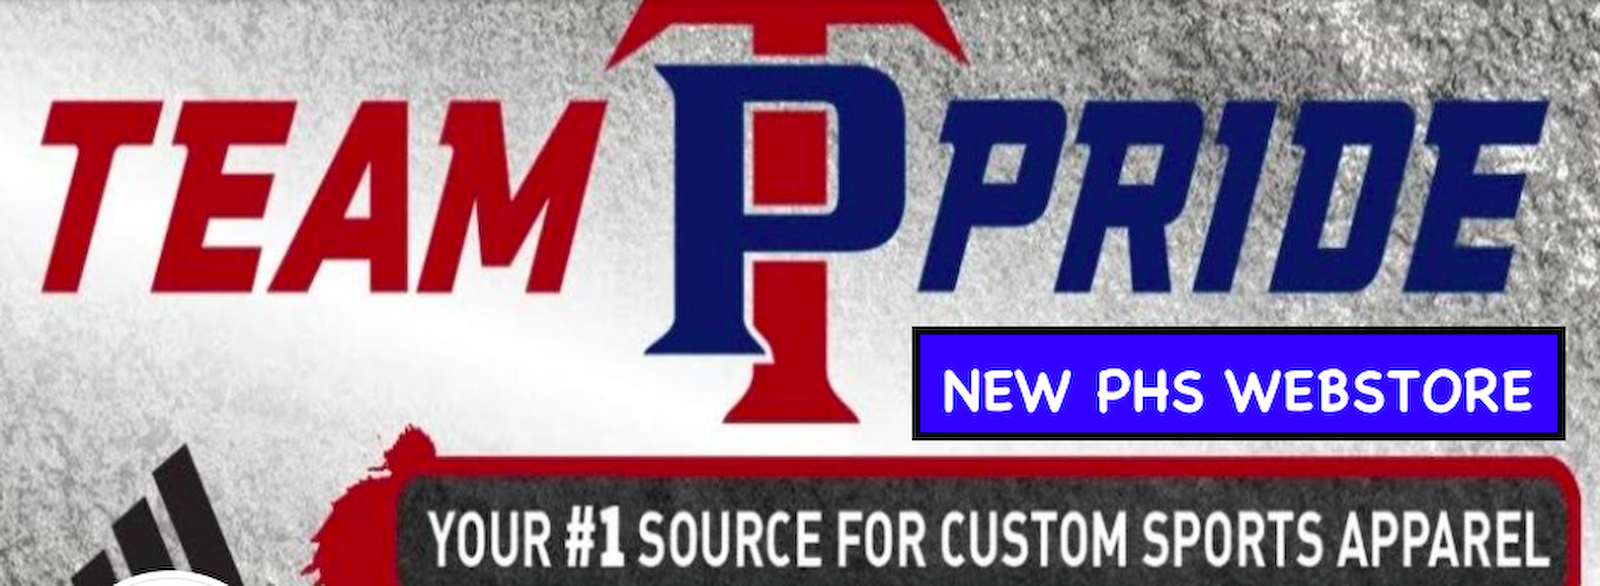 NEW PHS WEBSTORE (for all your Apparel Needs)